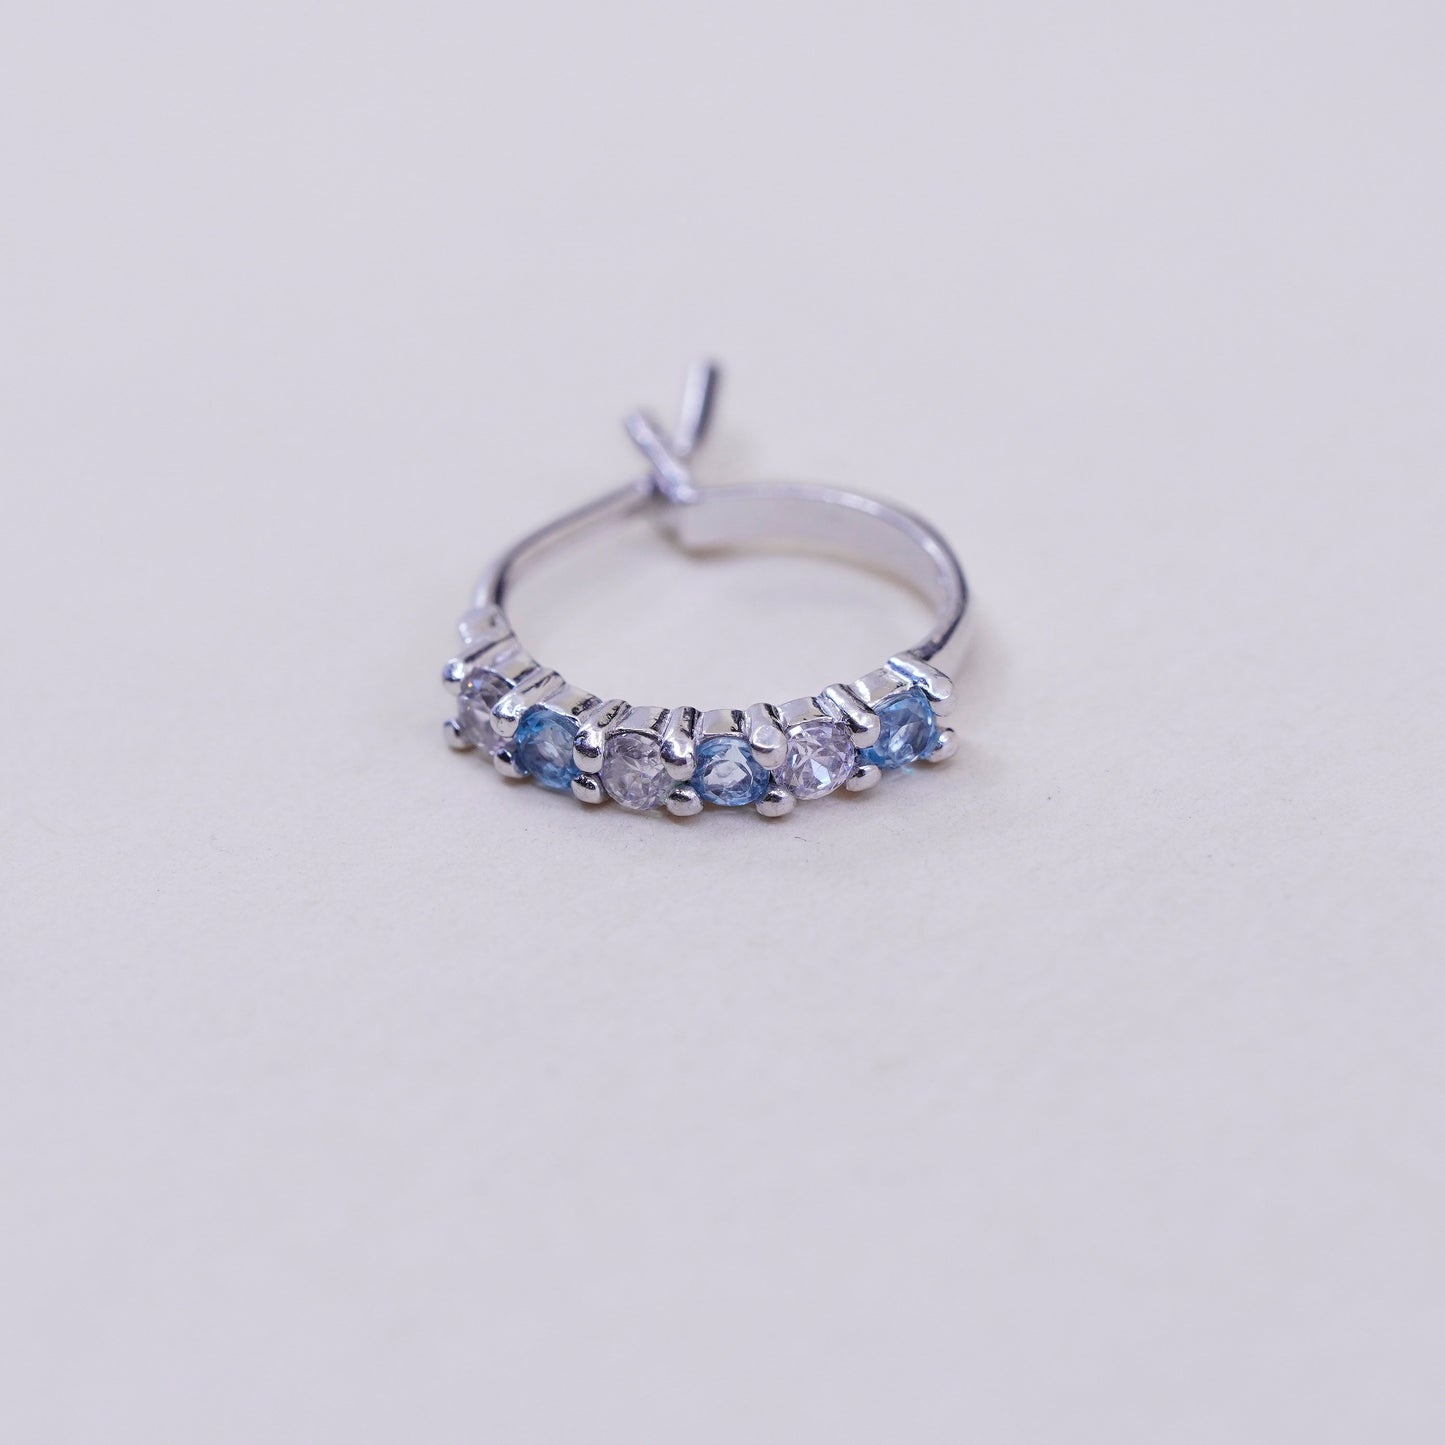 0.5”, fashion sterling silver earrings, 925 hoops, Huggie with clear blue Cz